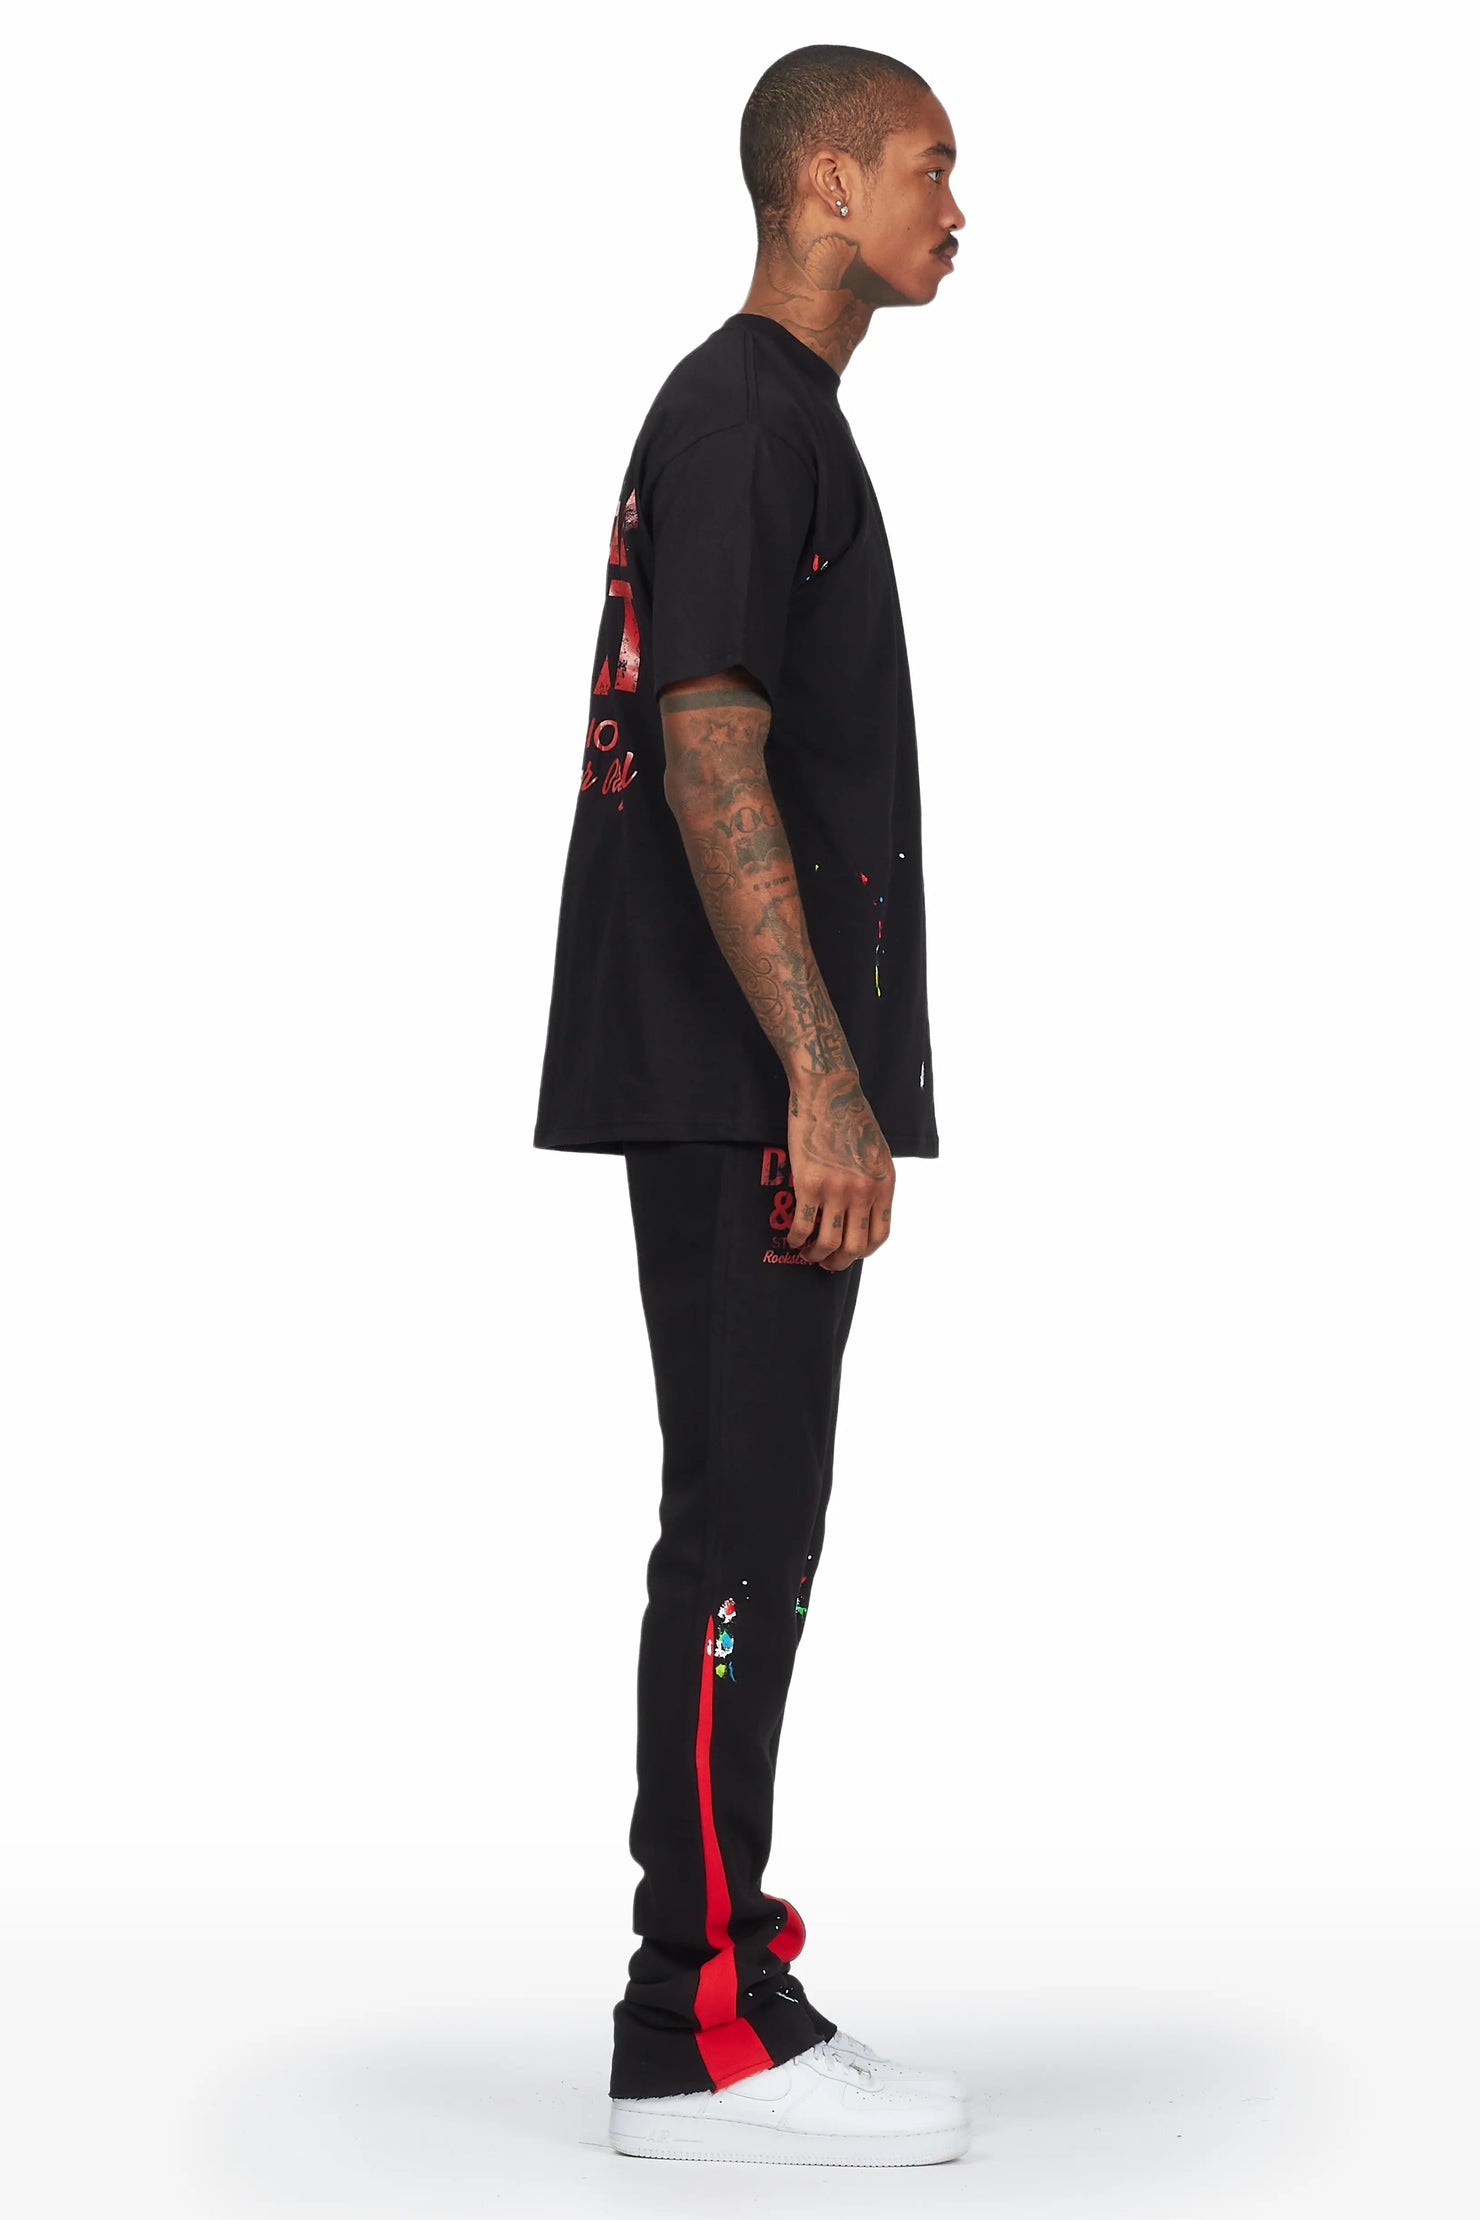 Mancha Black/Red T-Shirt Stacked Flare Track Set